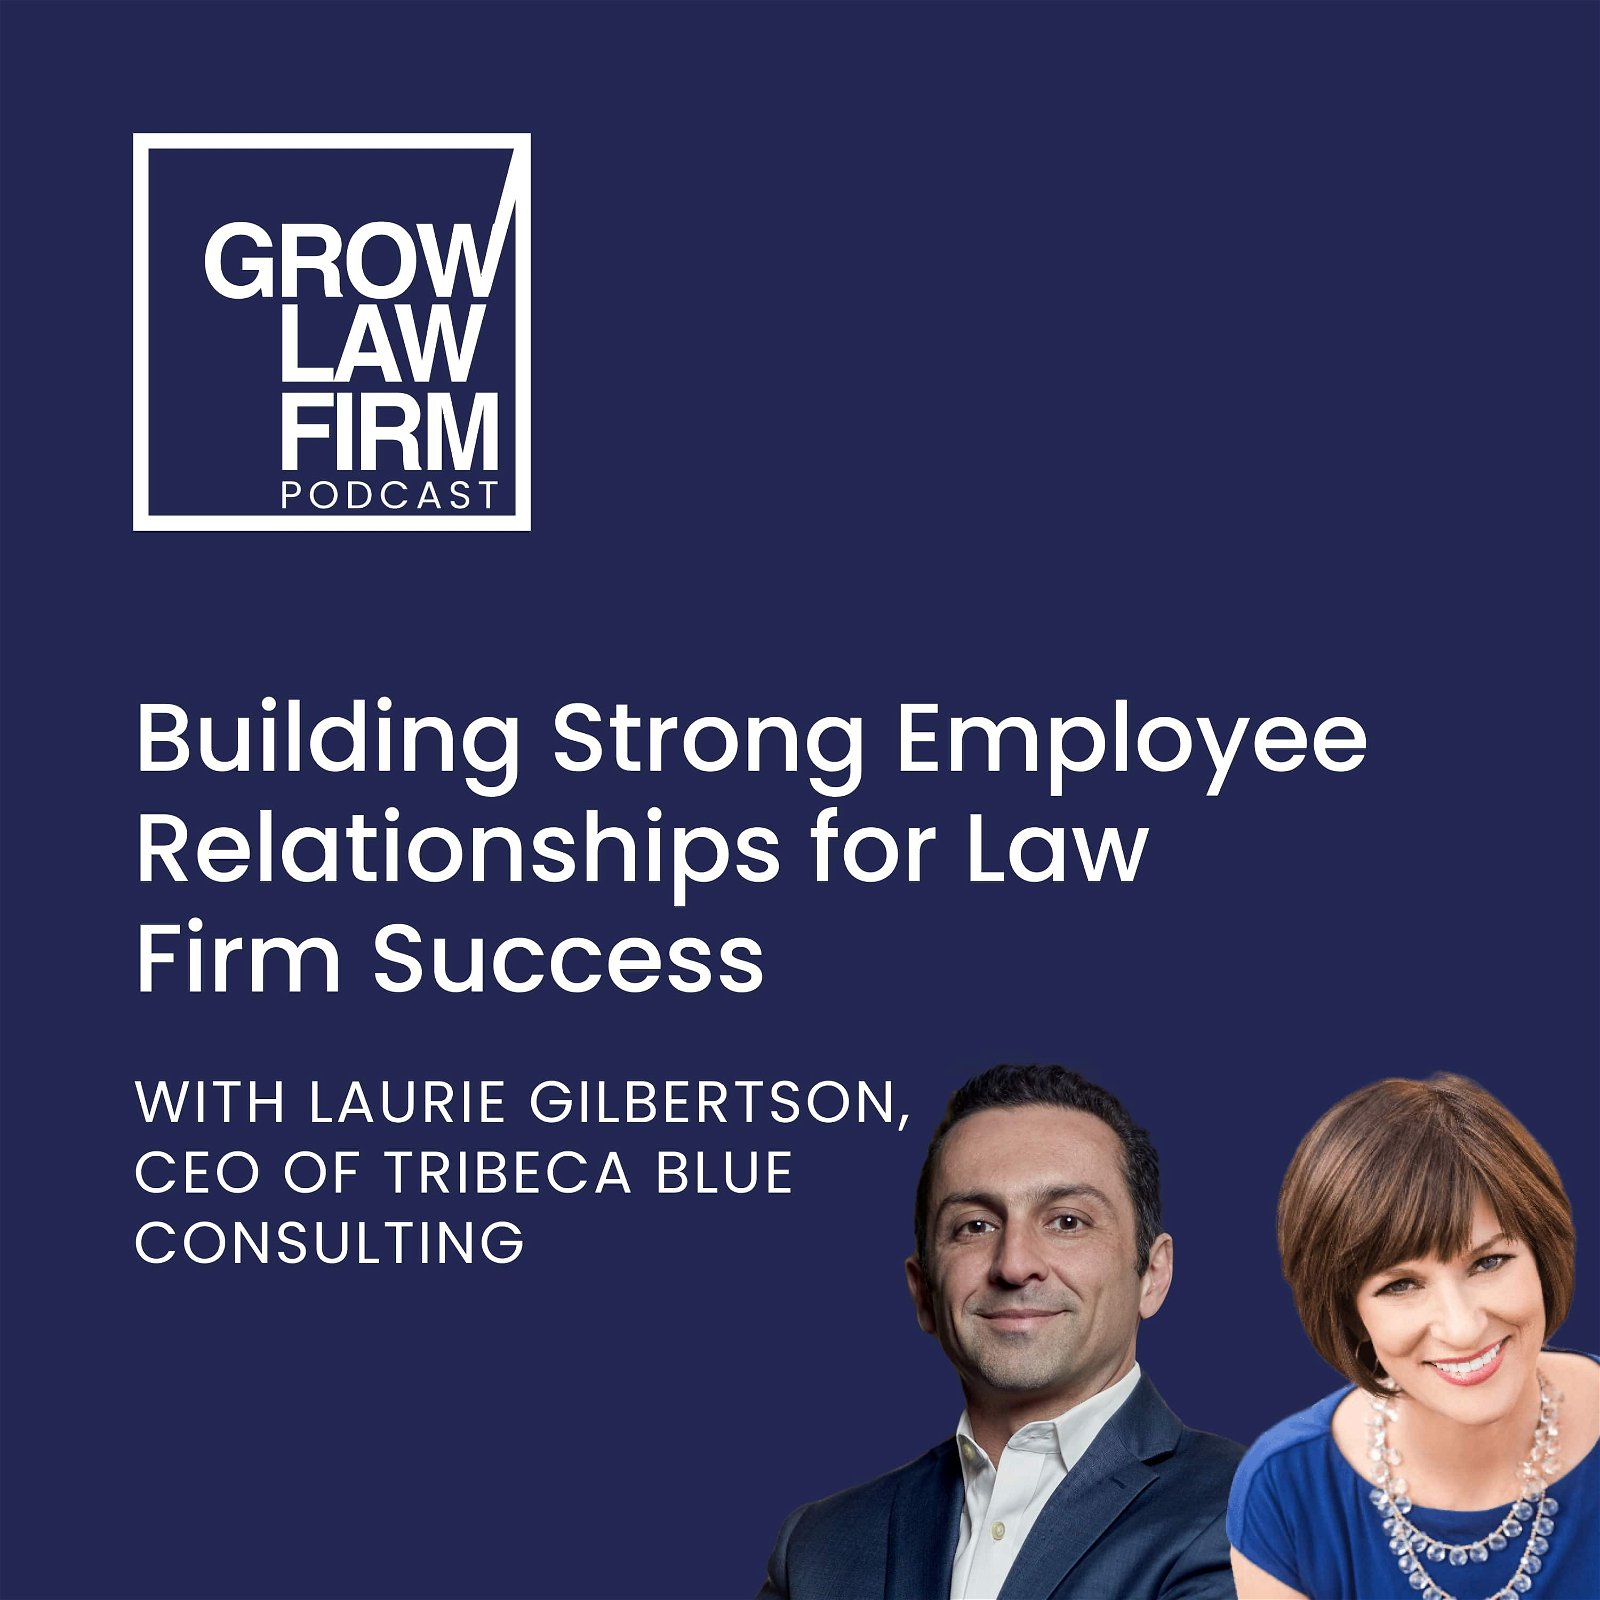 How to Retain Employees in Law Firms with Laurie Gilbertson, CEO of Tribeca Blue Consulting